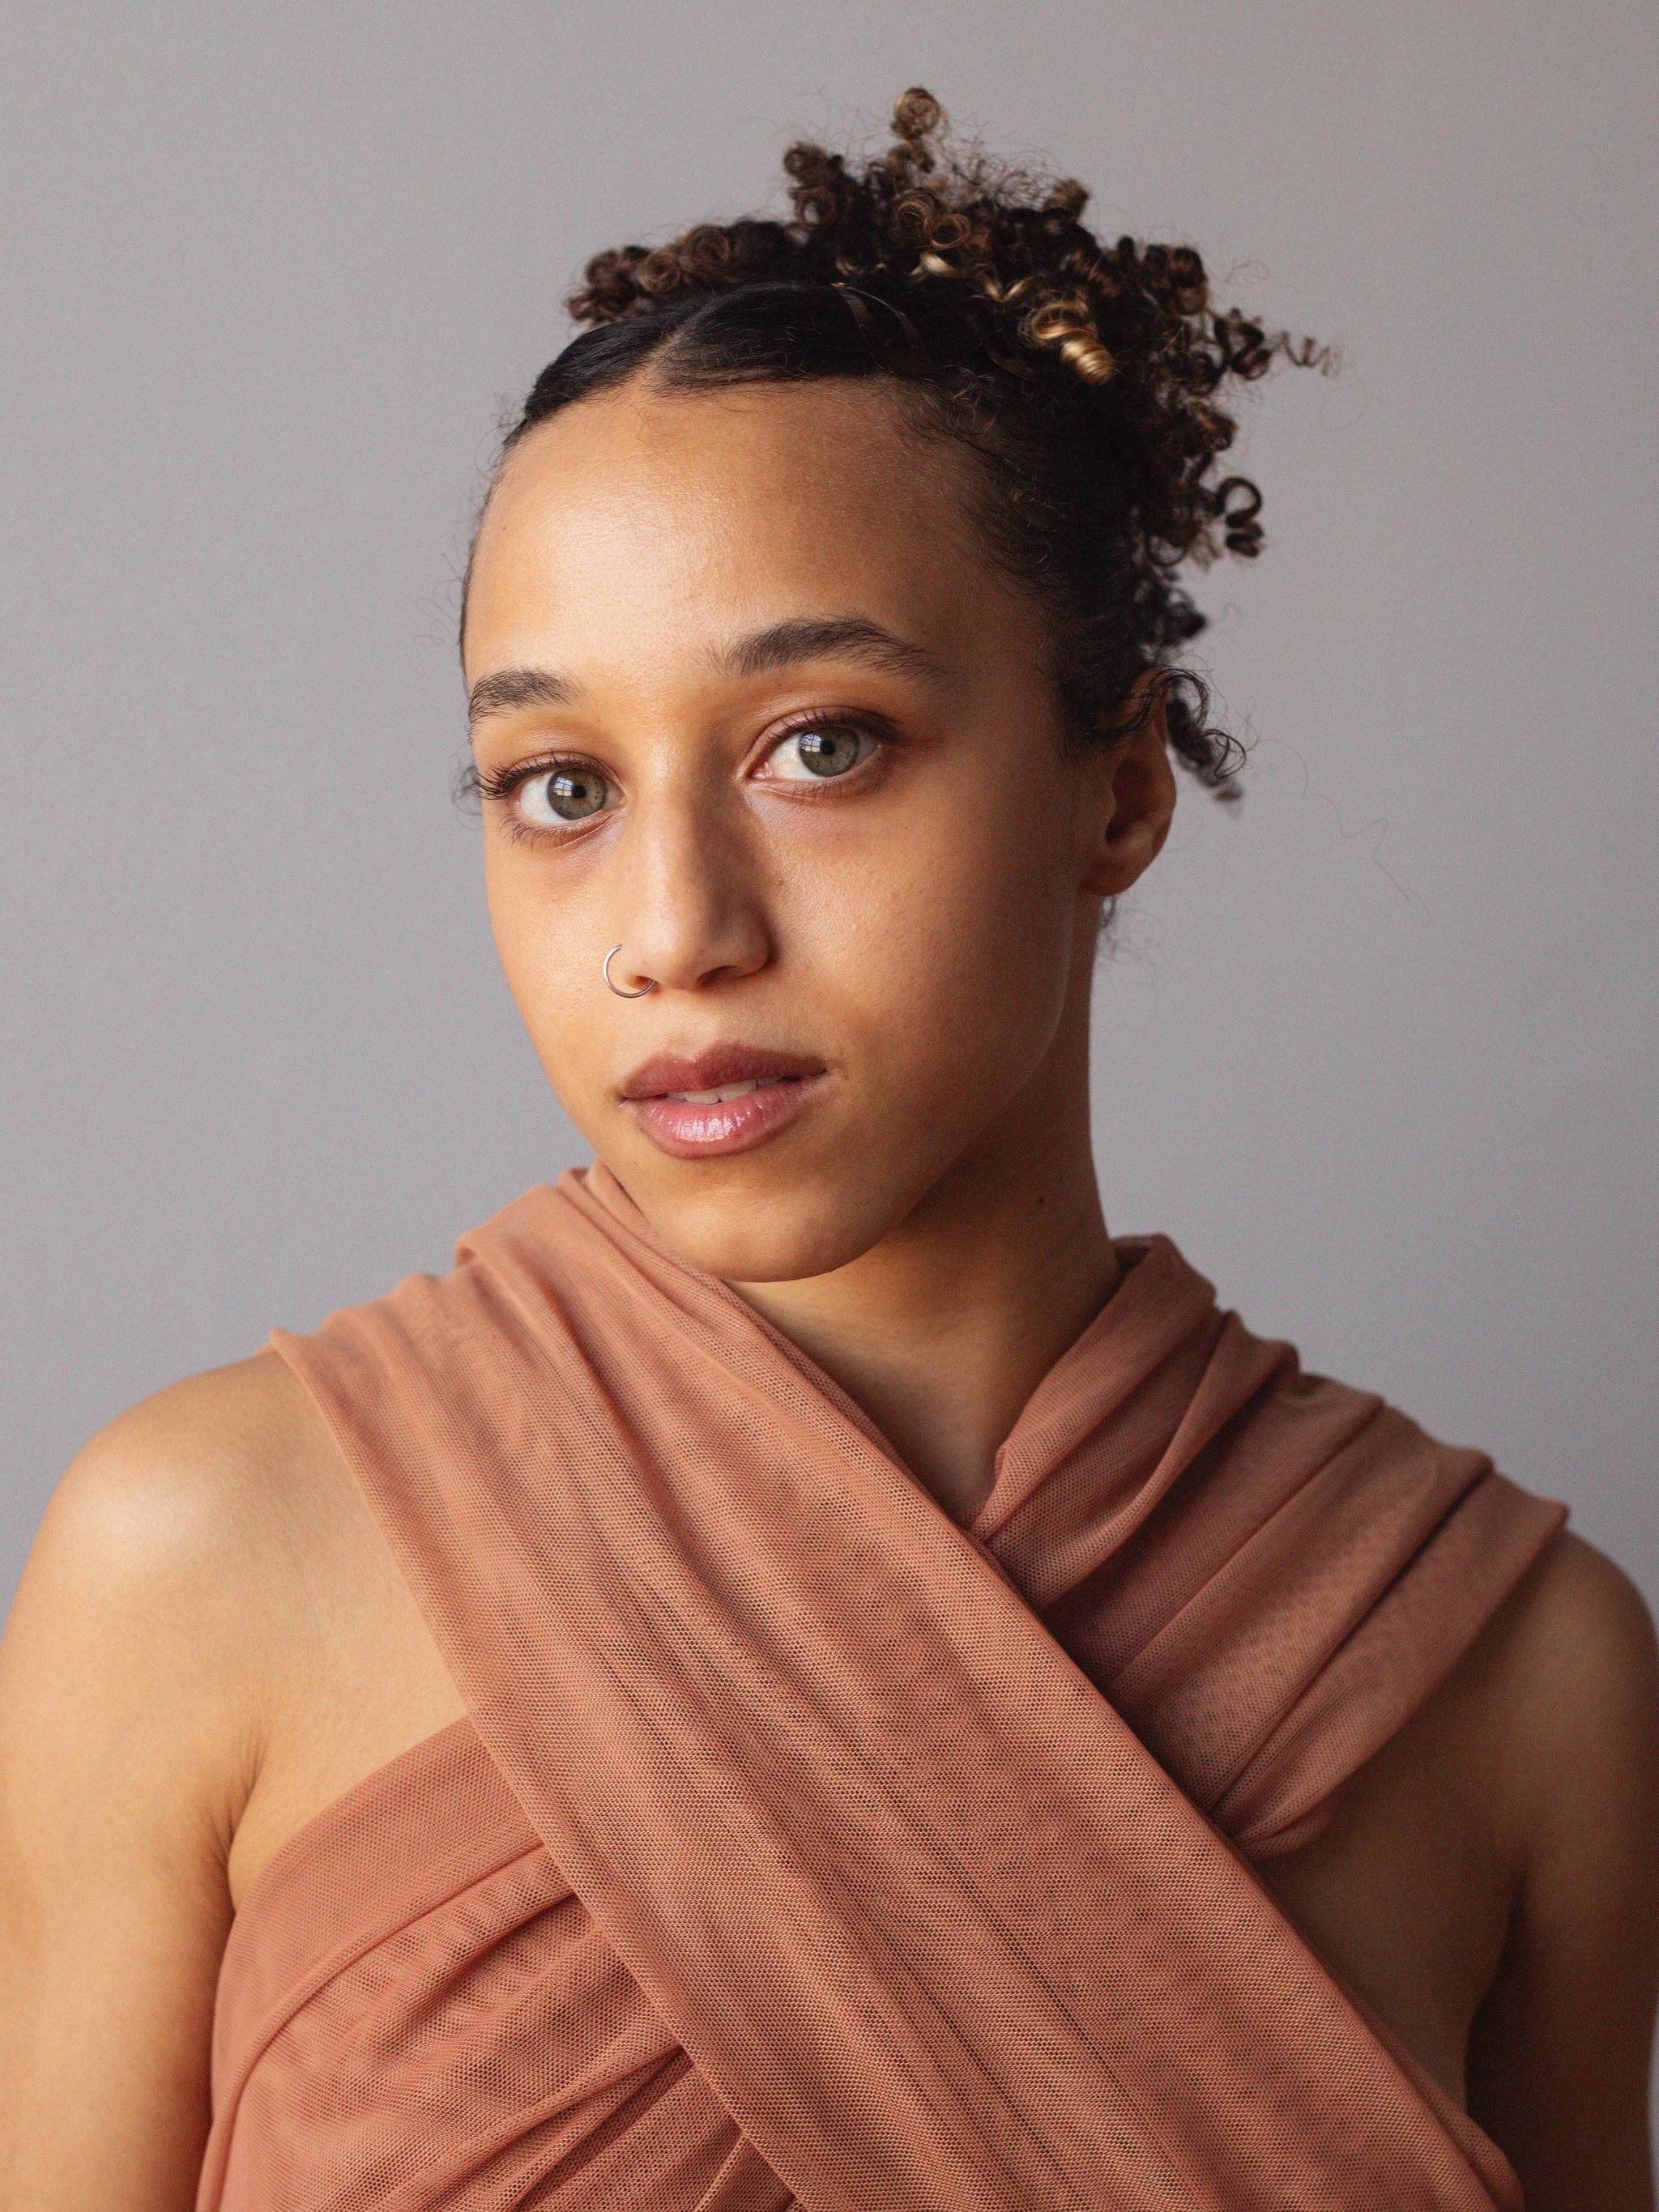 A portrait of Dominican Greene, a biracial, Black, queer woman. She looks directly at us, posing against a neutral background. She has light brown skin and her hair pulled up behind her head. She wears a tan garment that wraps behind her neck, leaving shoulders bare. 